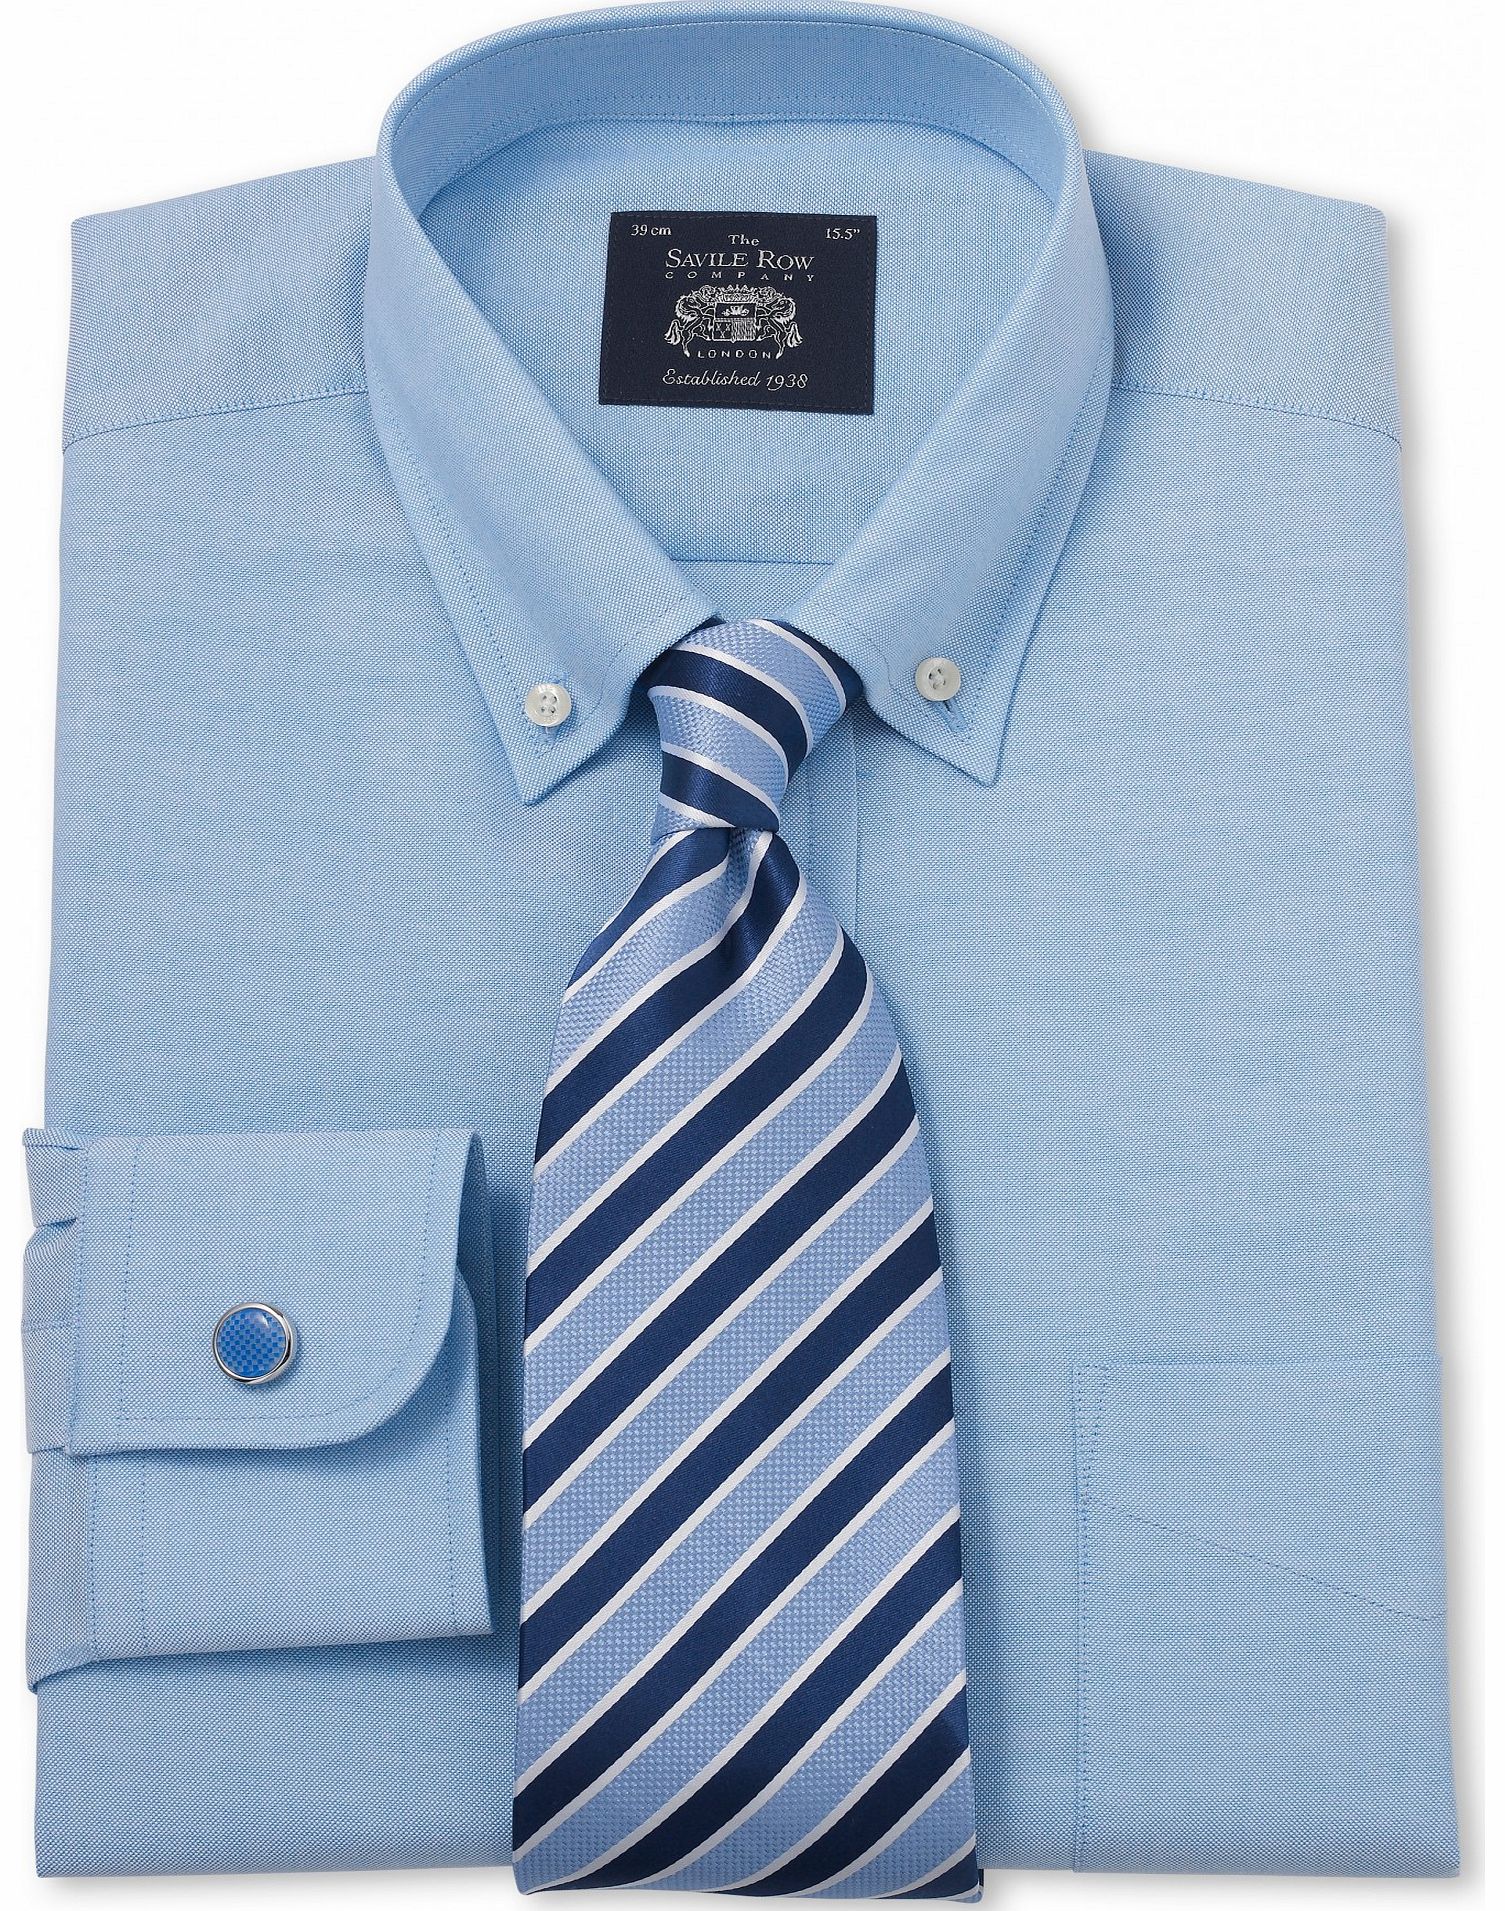 Savile Row Company Blue Pinpoint Classic Fit Shirt 17`` Lengthened